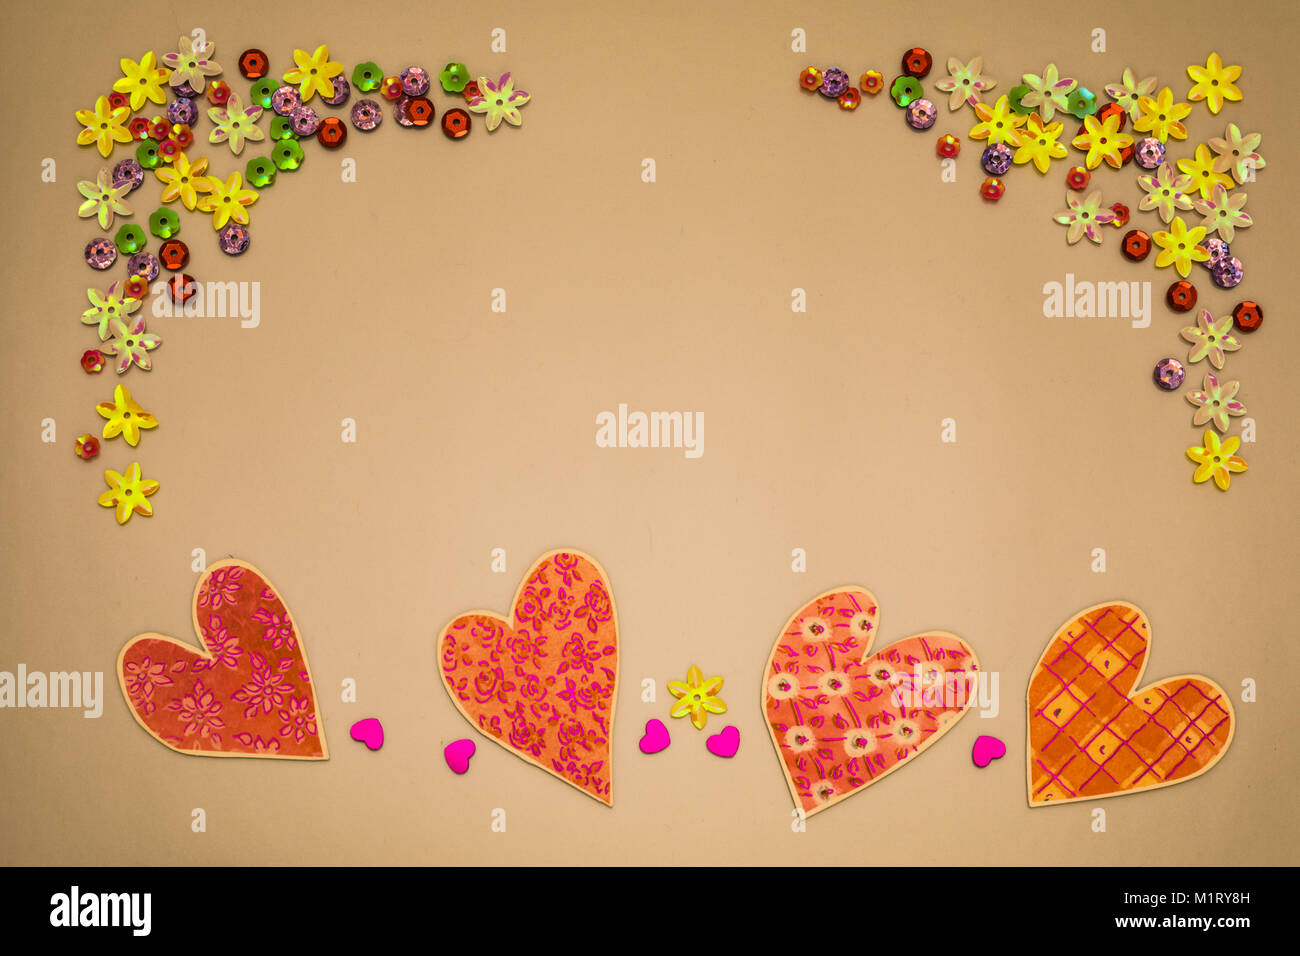 Greeting card with hearts on colored background Stock Photo